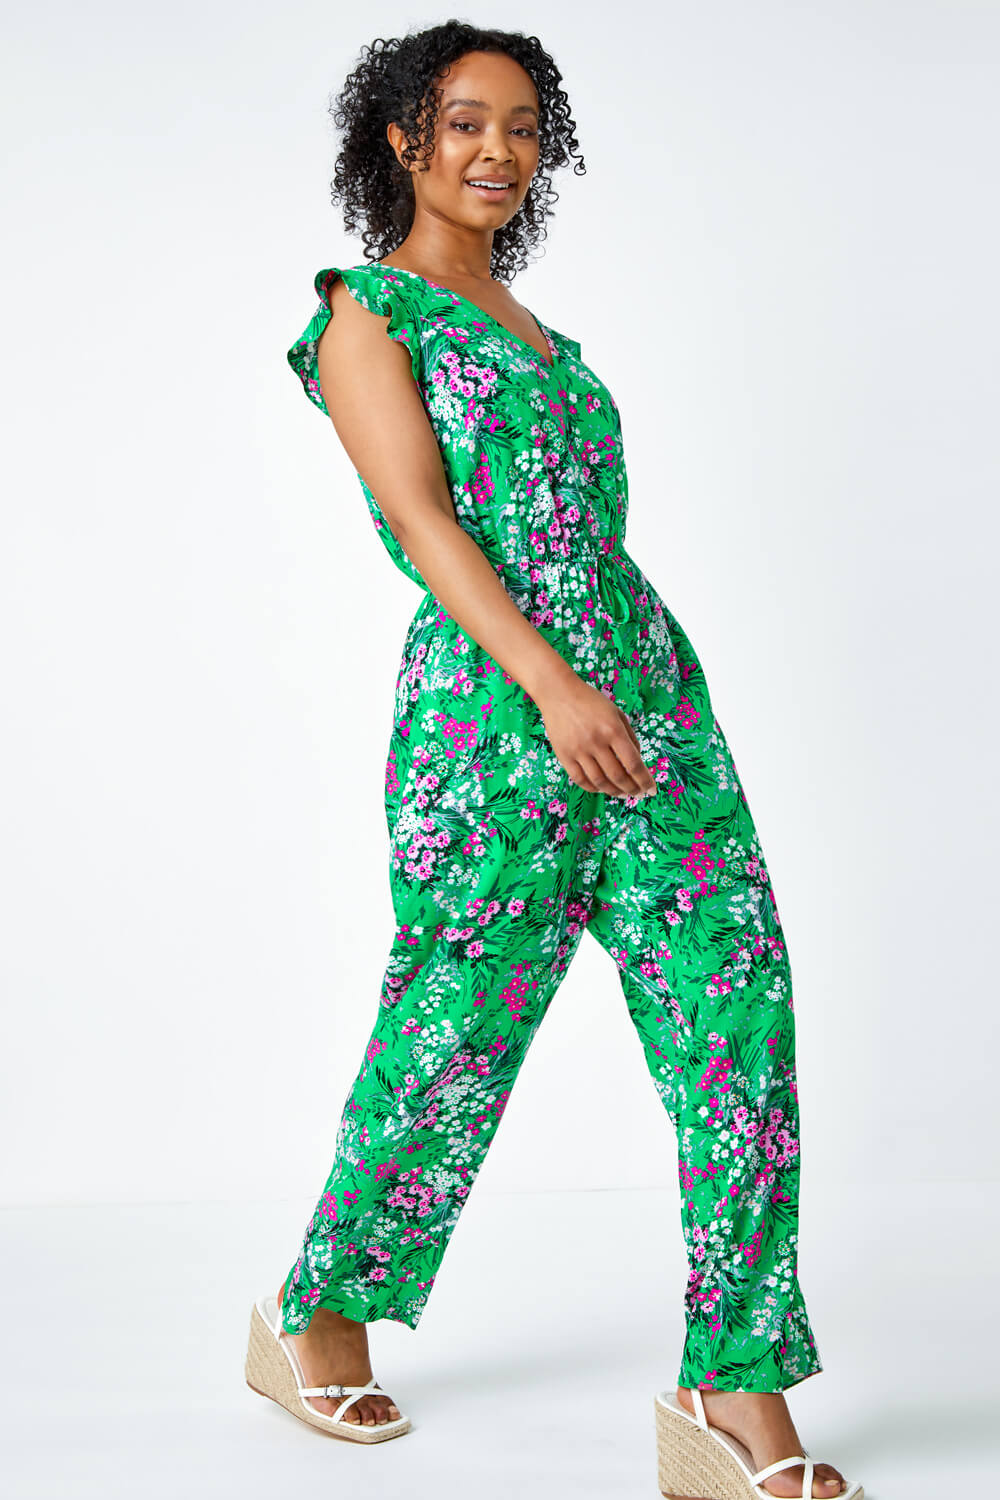 Green Petite Ditsy Floral Stretch Jumpsuit, Image 2 of 5